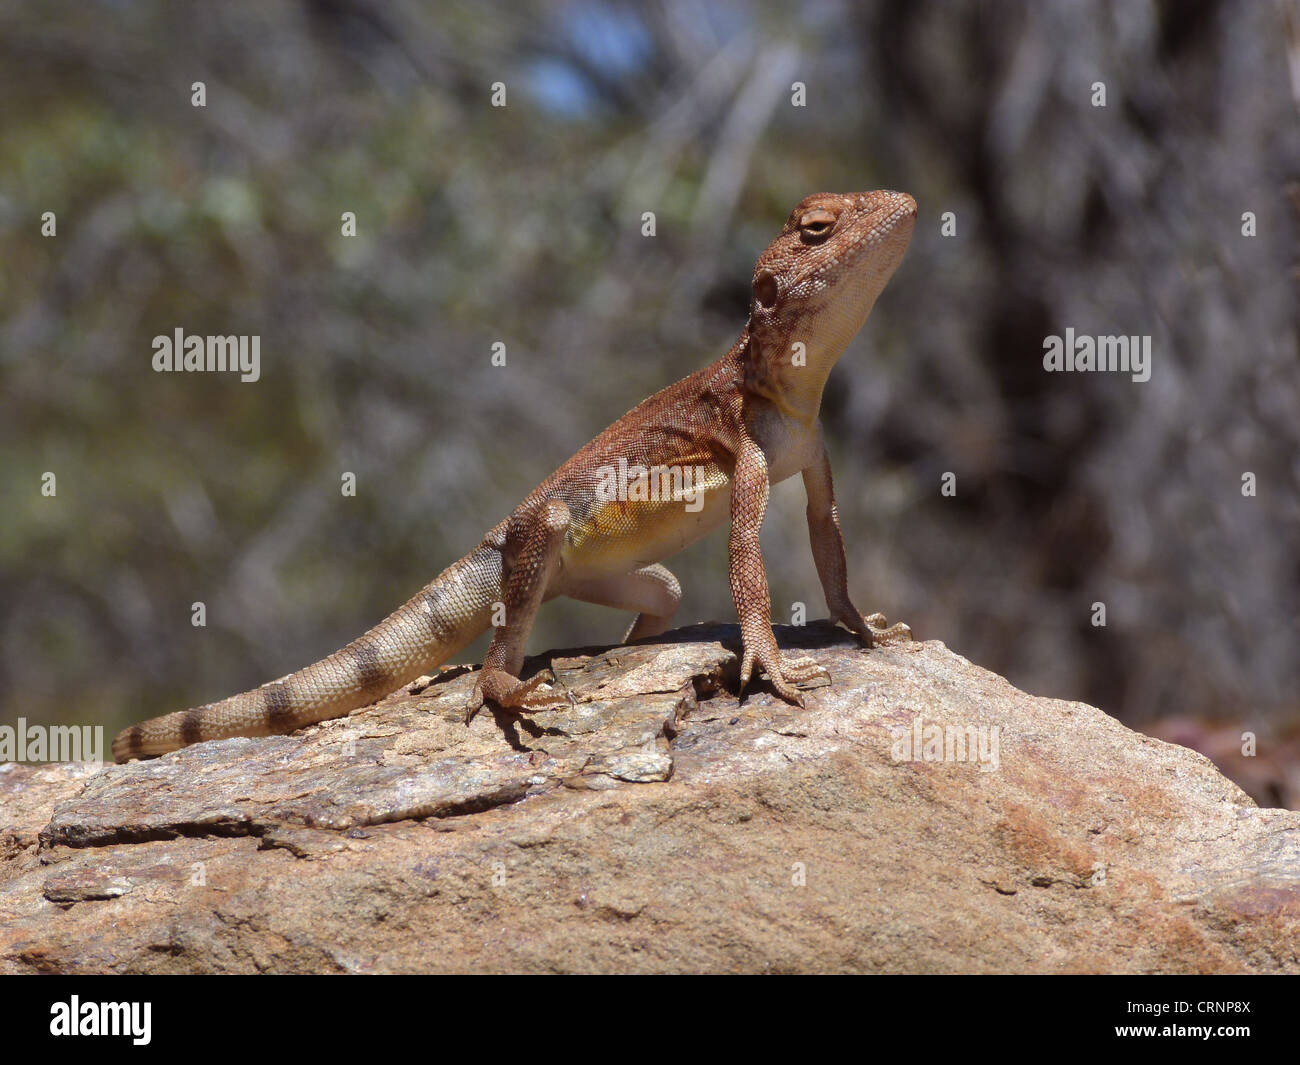 Pebble Dragon (Tympanocryptis cephalus) adult male, standing on rock, with hind foot raised to keep cool, Western Australia, Stock Photo